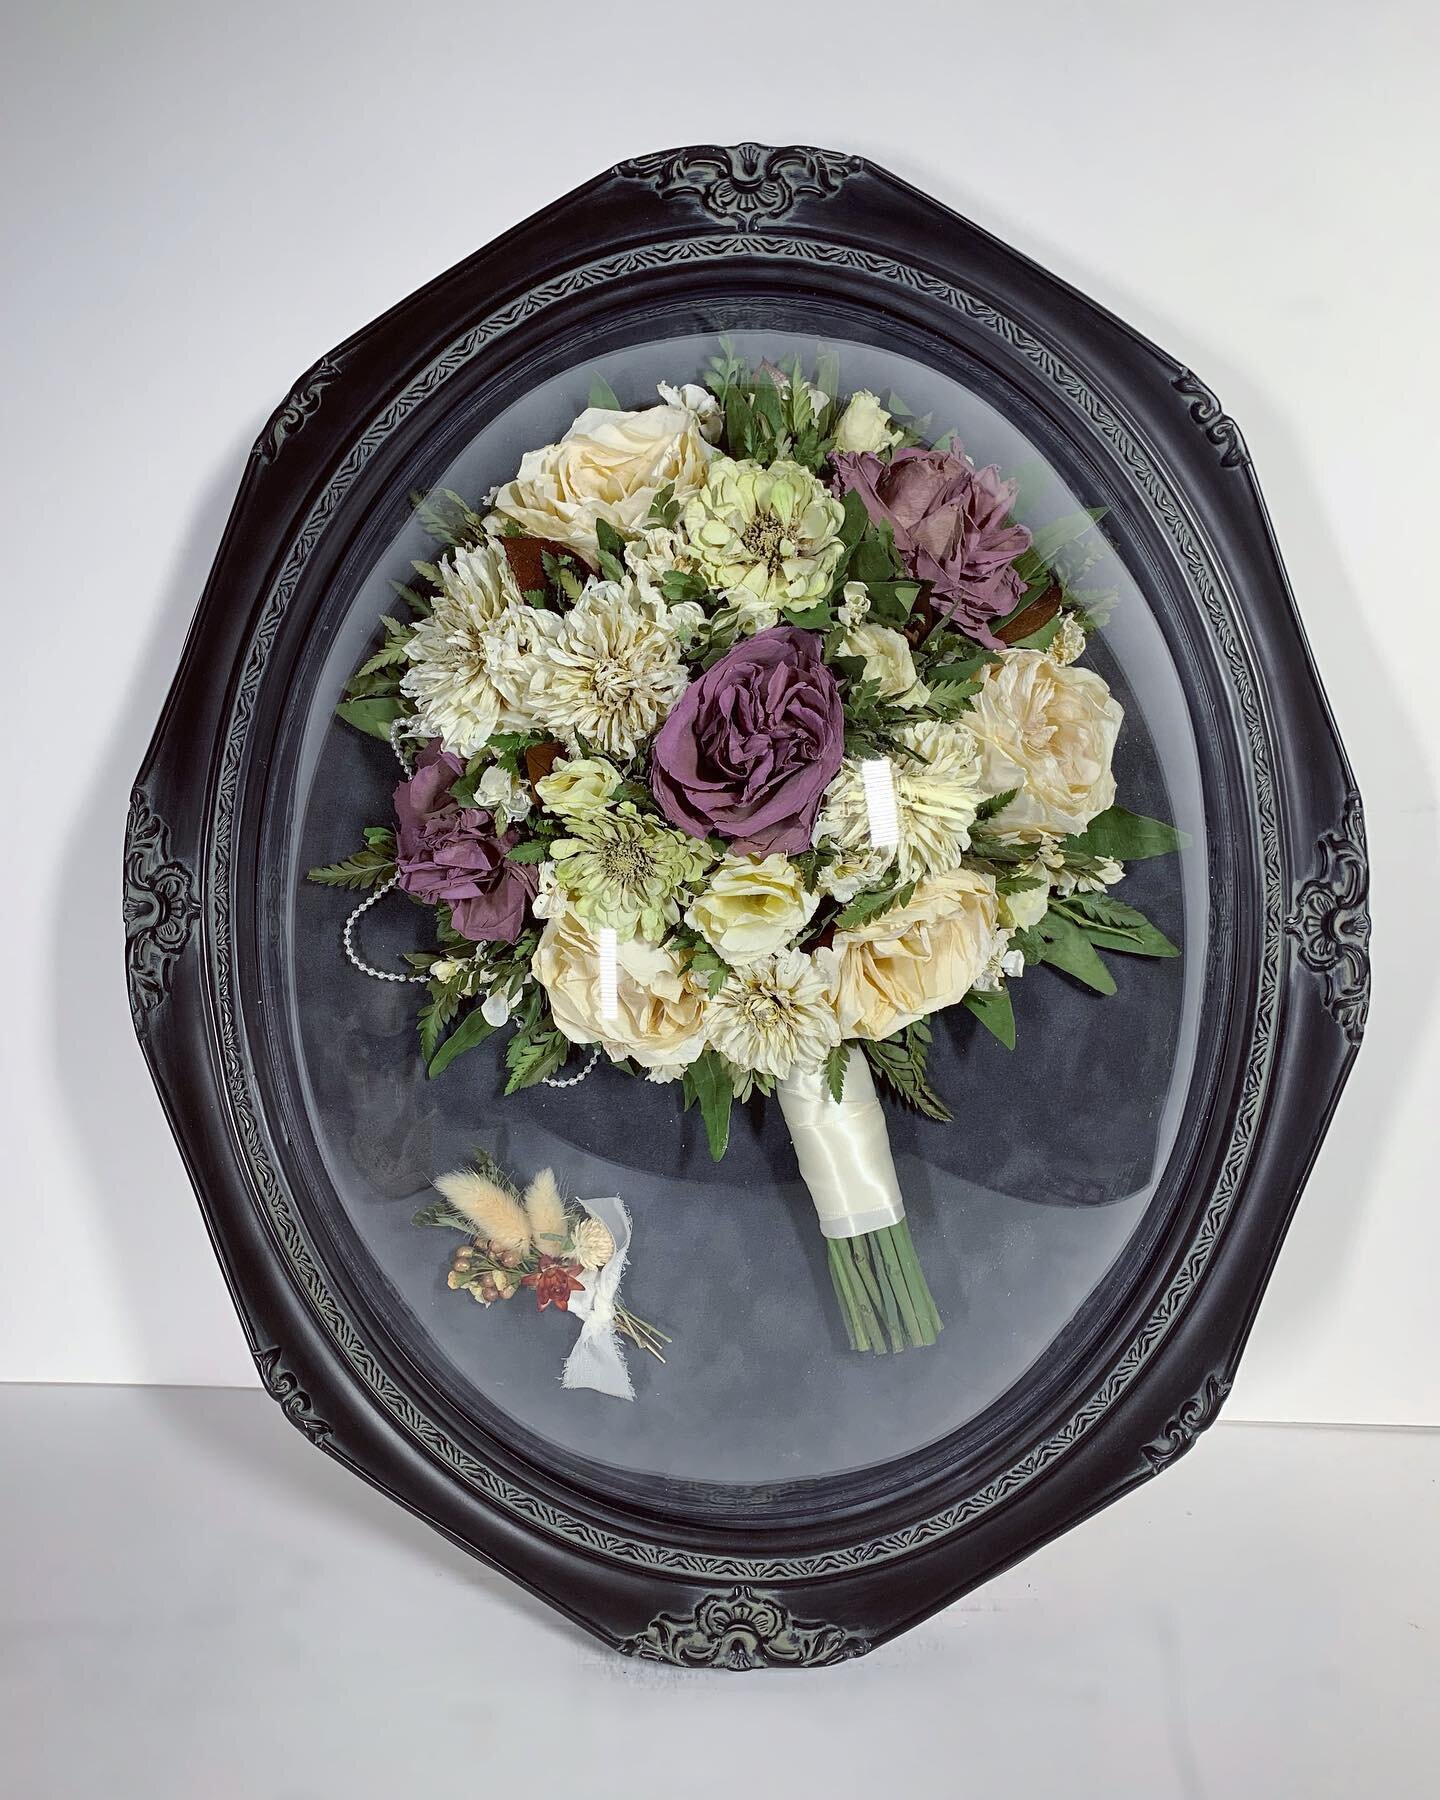 This brides beautiful bouquet is displayed in a gorgeous Victorian antique style oval frame. Don&rsquo;t forget to make your reservations to preserve your bouquet!! &bull;
&bull;
&bull;
&bull;
&bull;
#preservedflower #flowerpreserving #weddingflowers